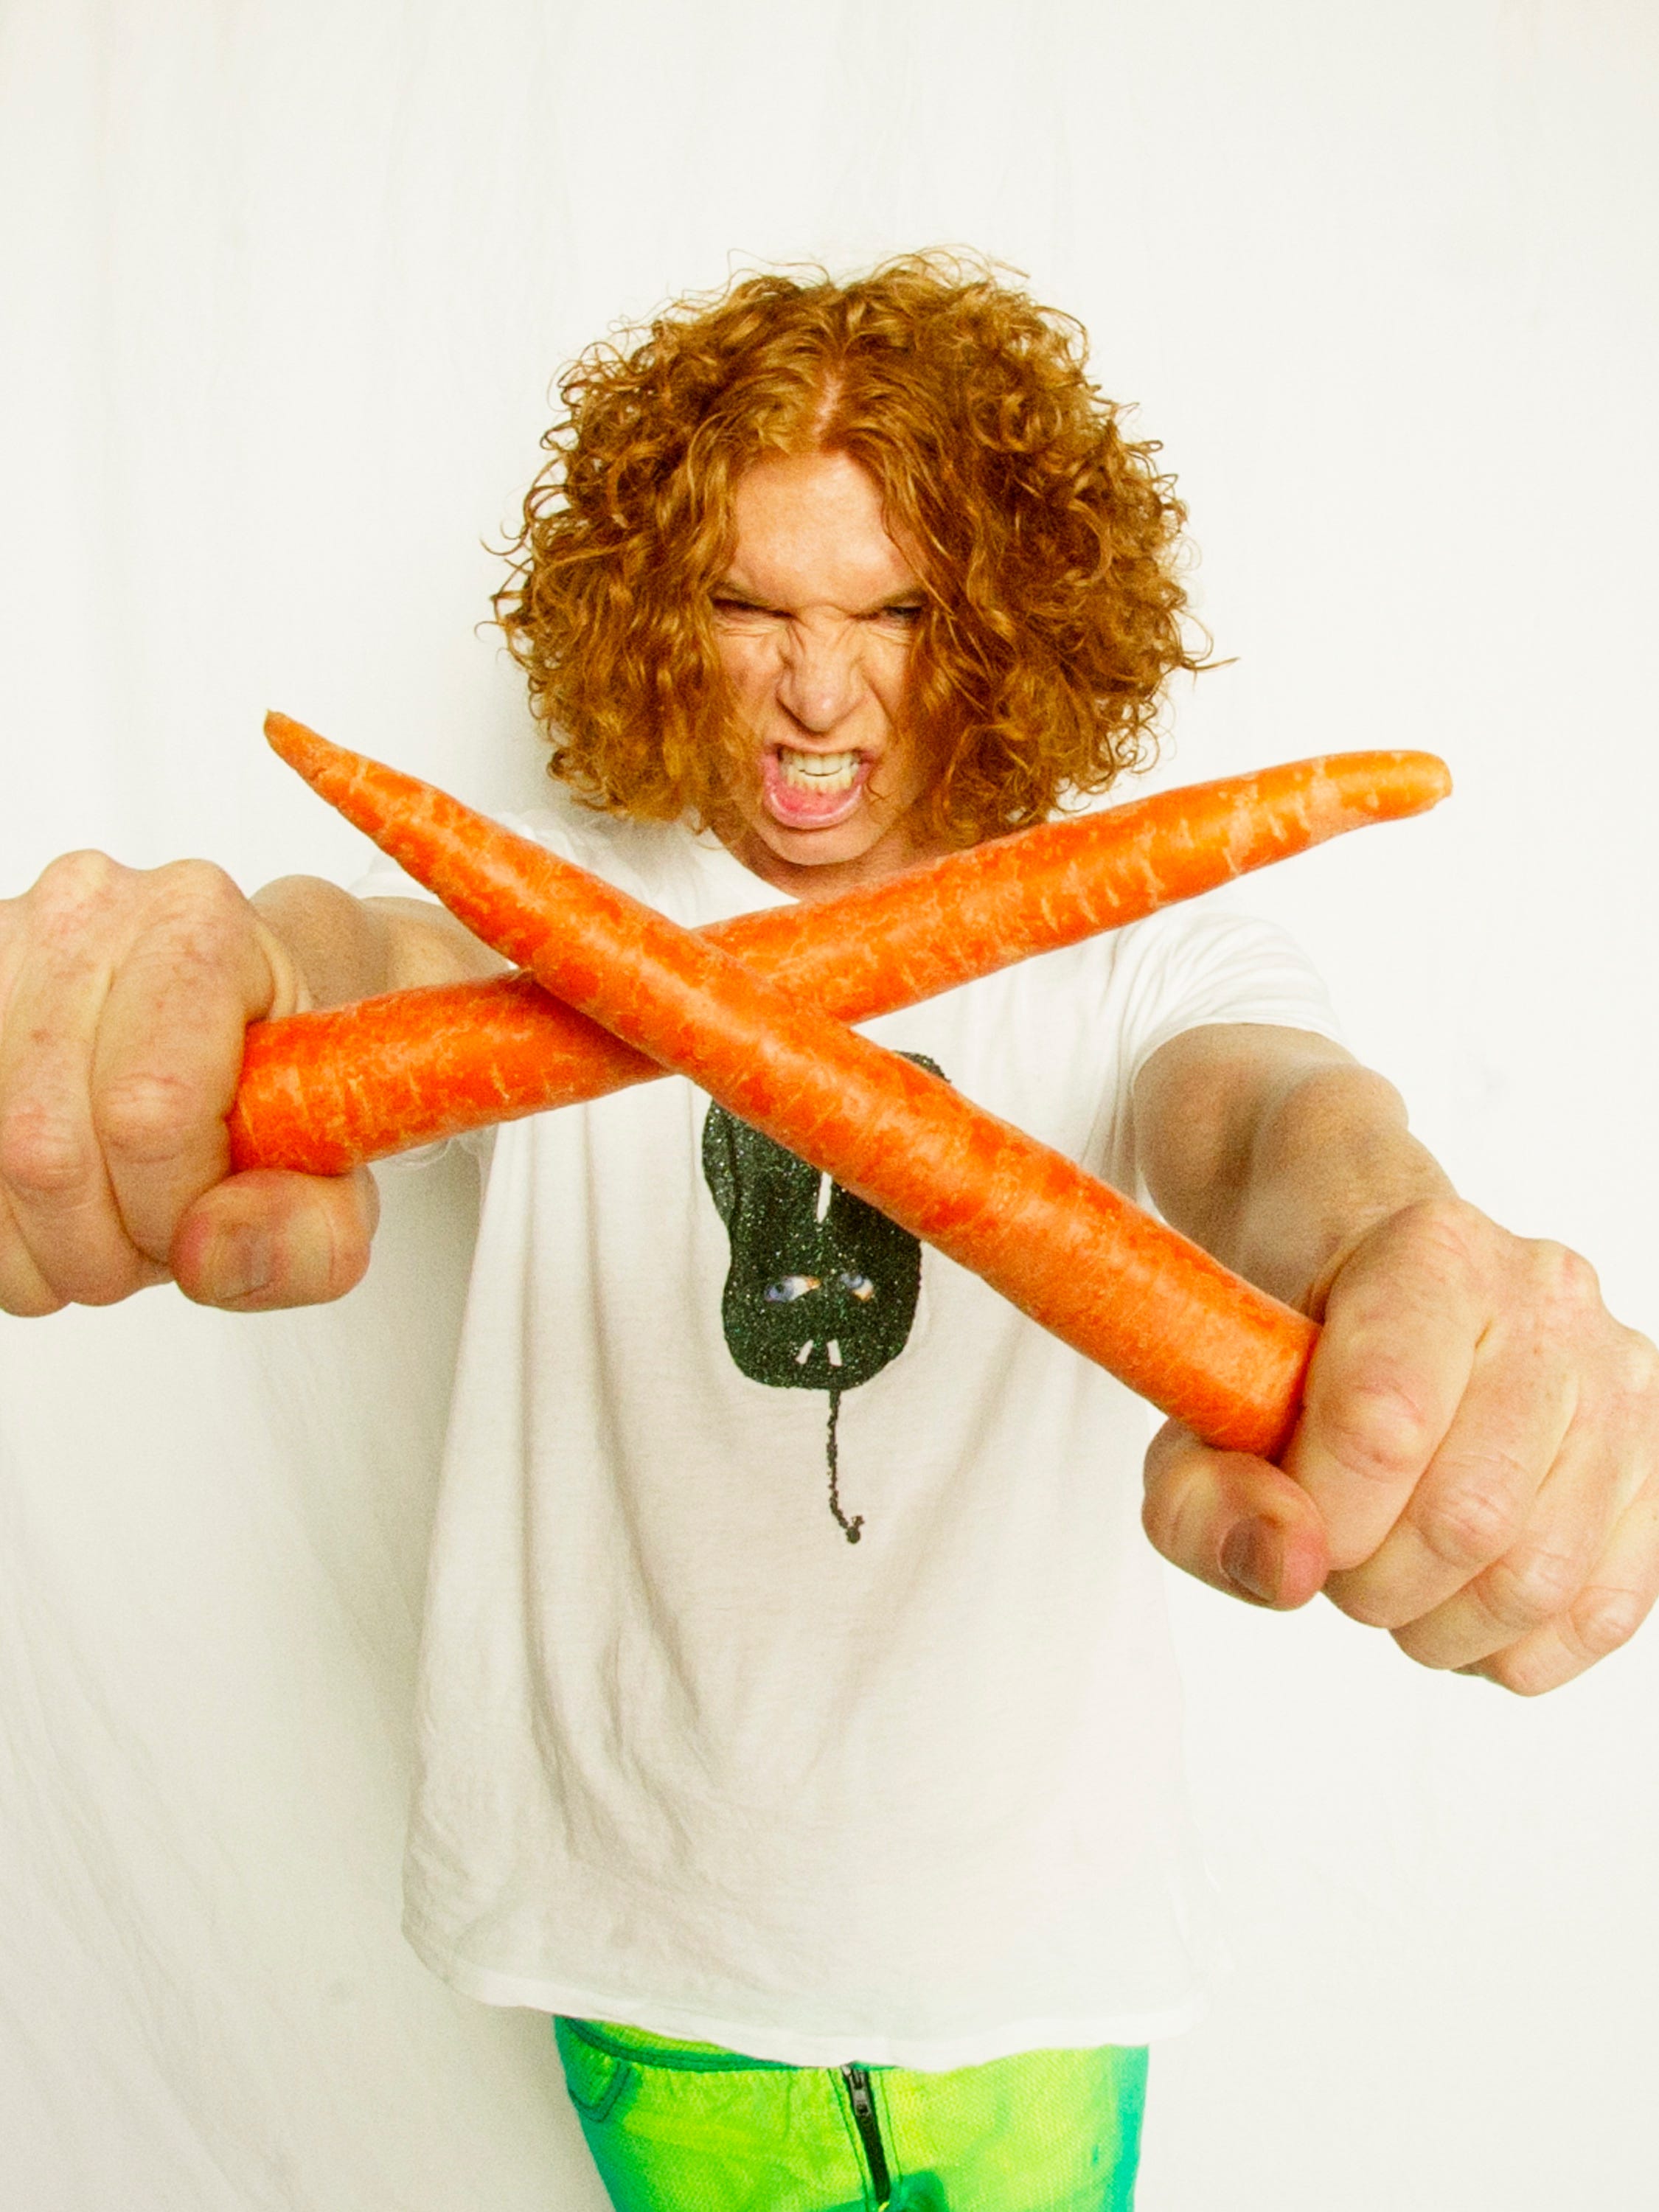 slutpunkt Algebra Monarch Carrot Top coming to Reno first time in 10 years